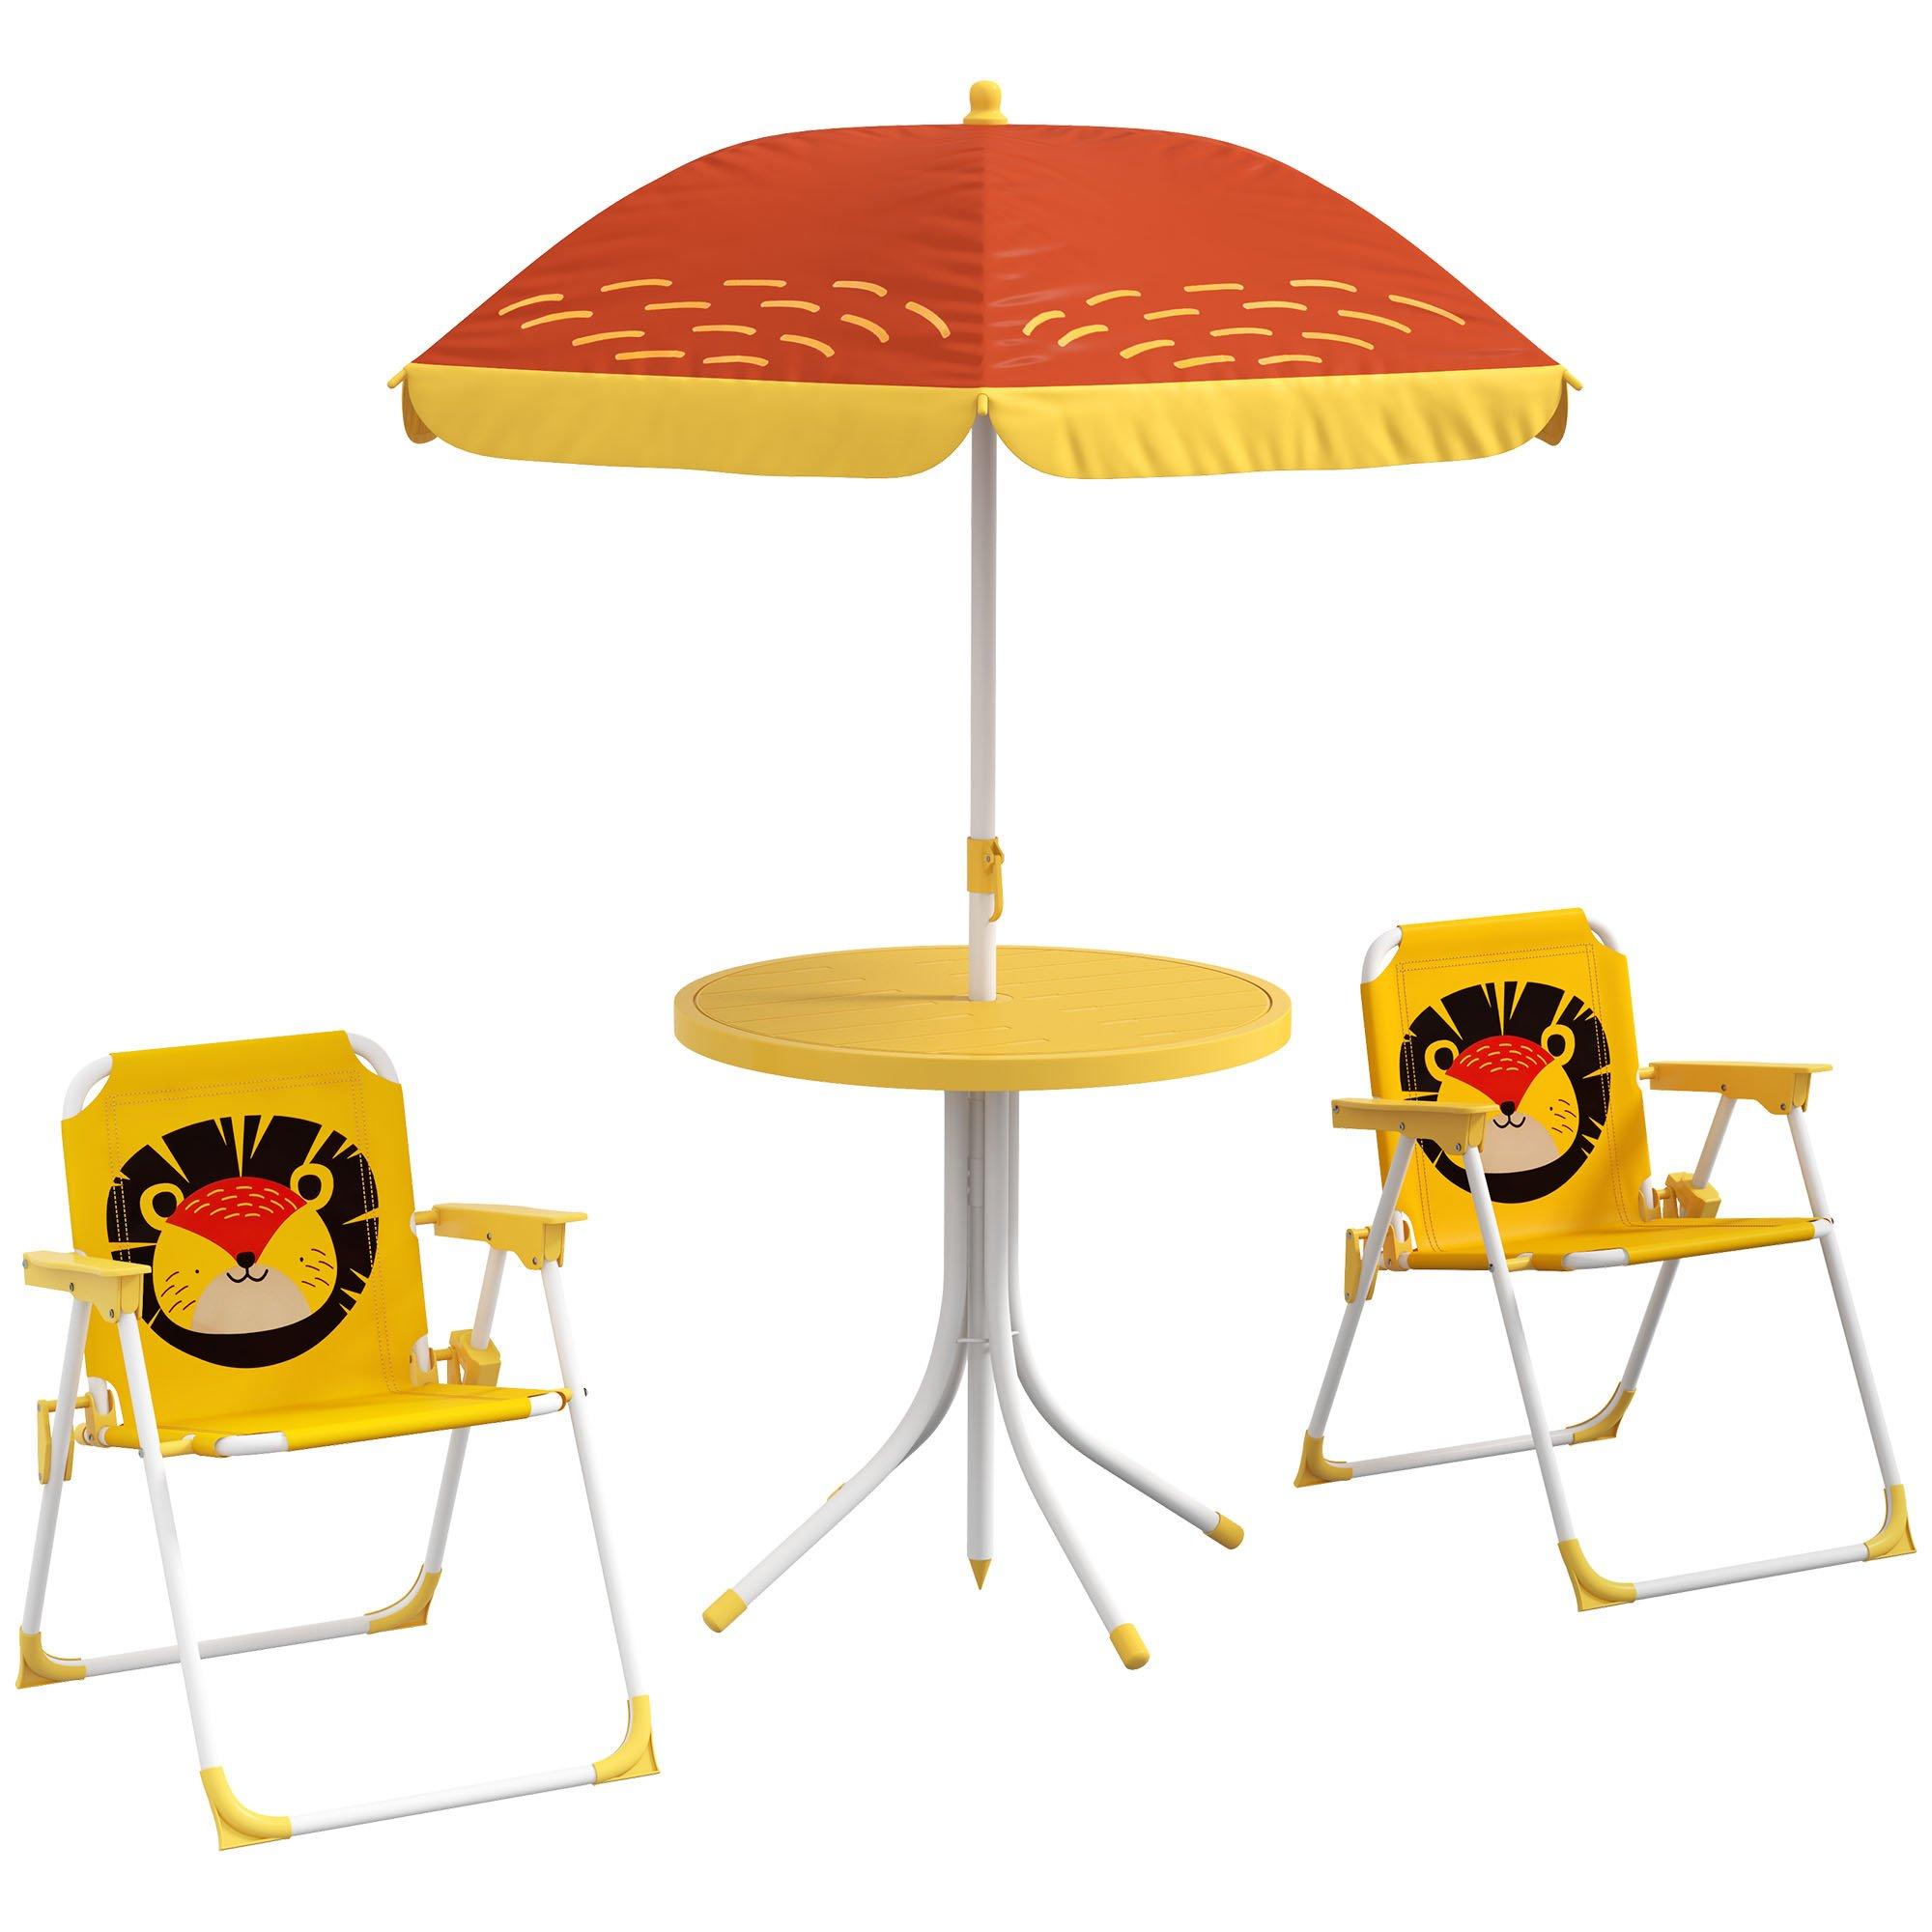 Children Table and Chair Set Outdoor Garden Furniture Set w/ Lion Theme - Yellow